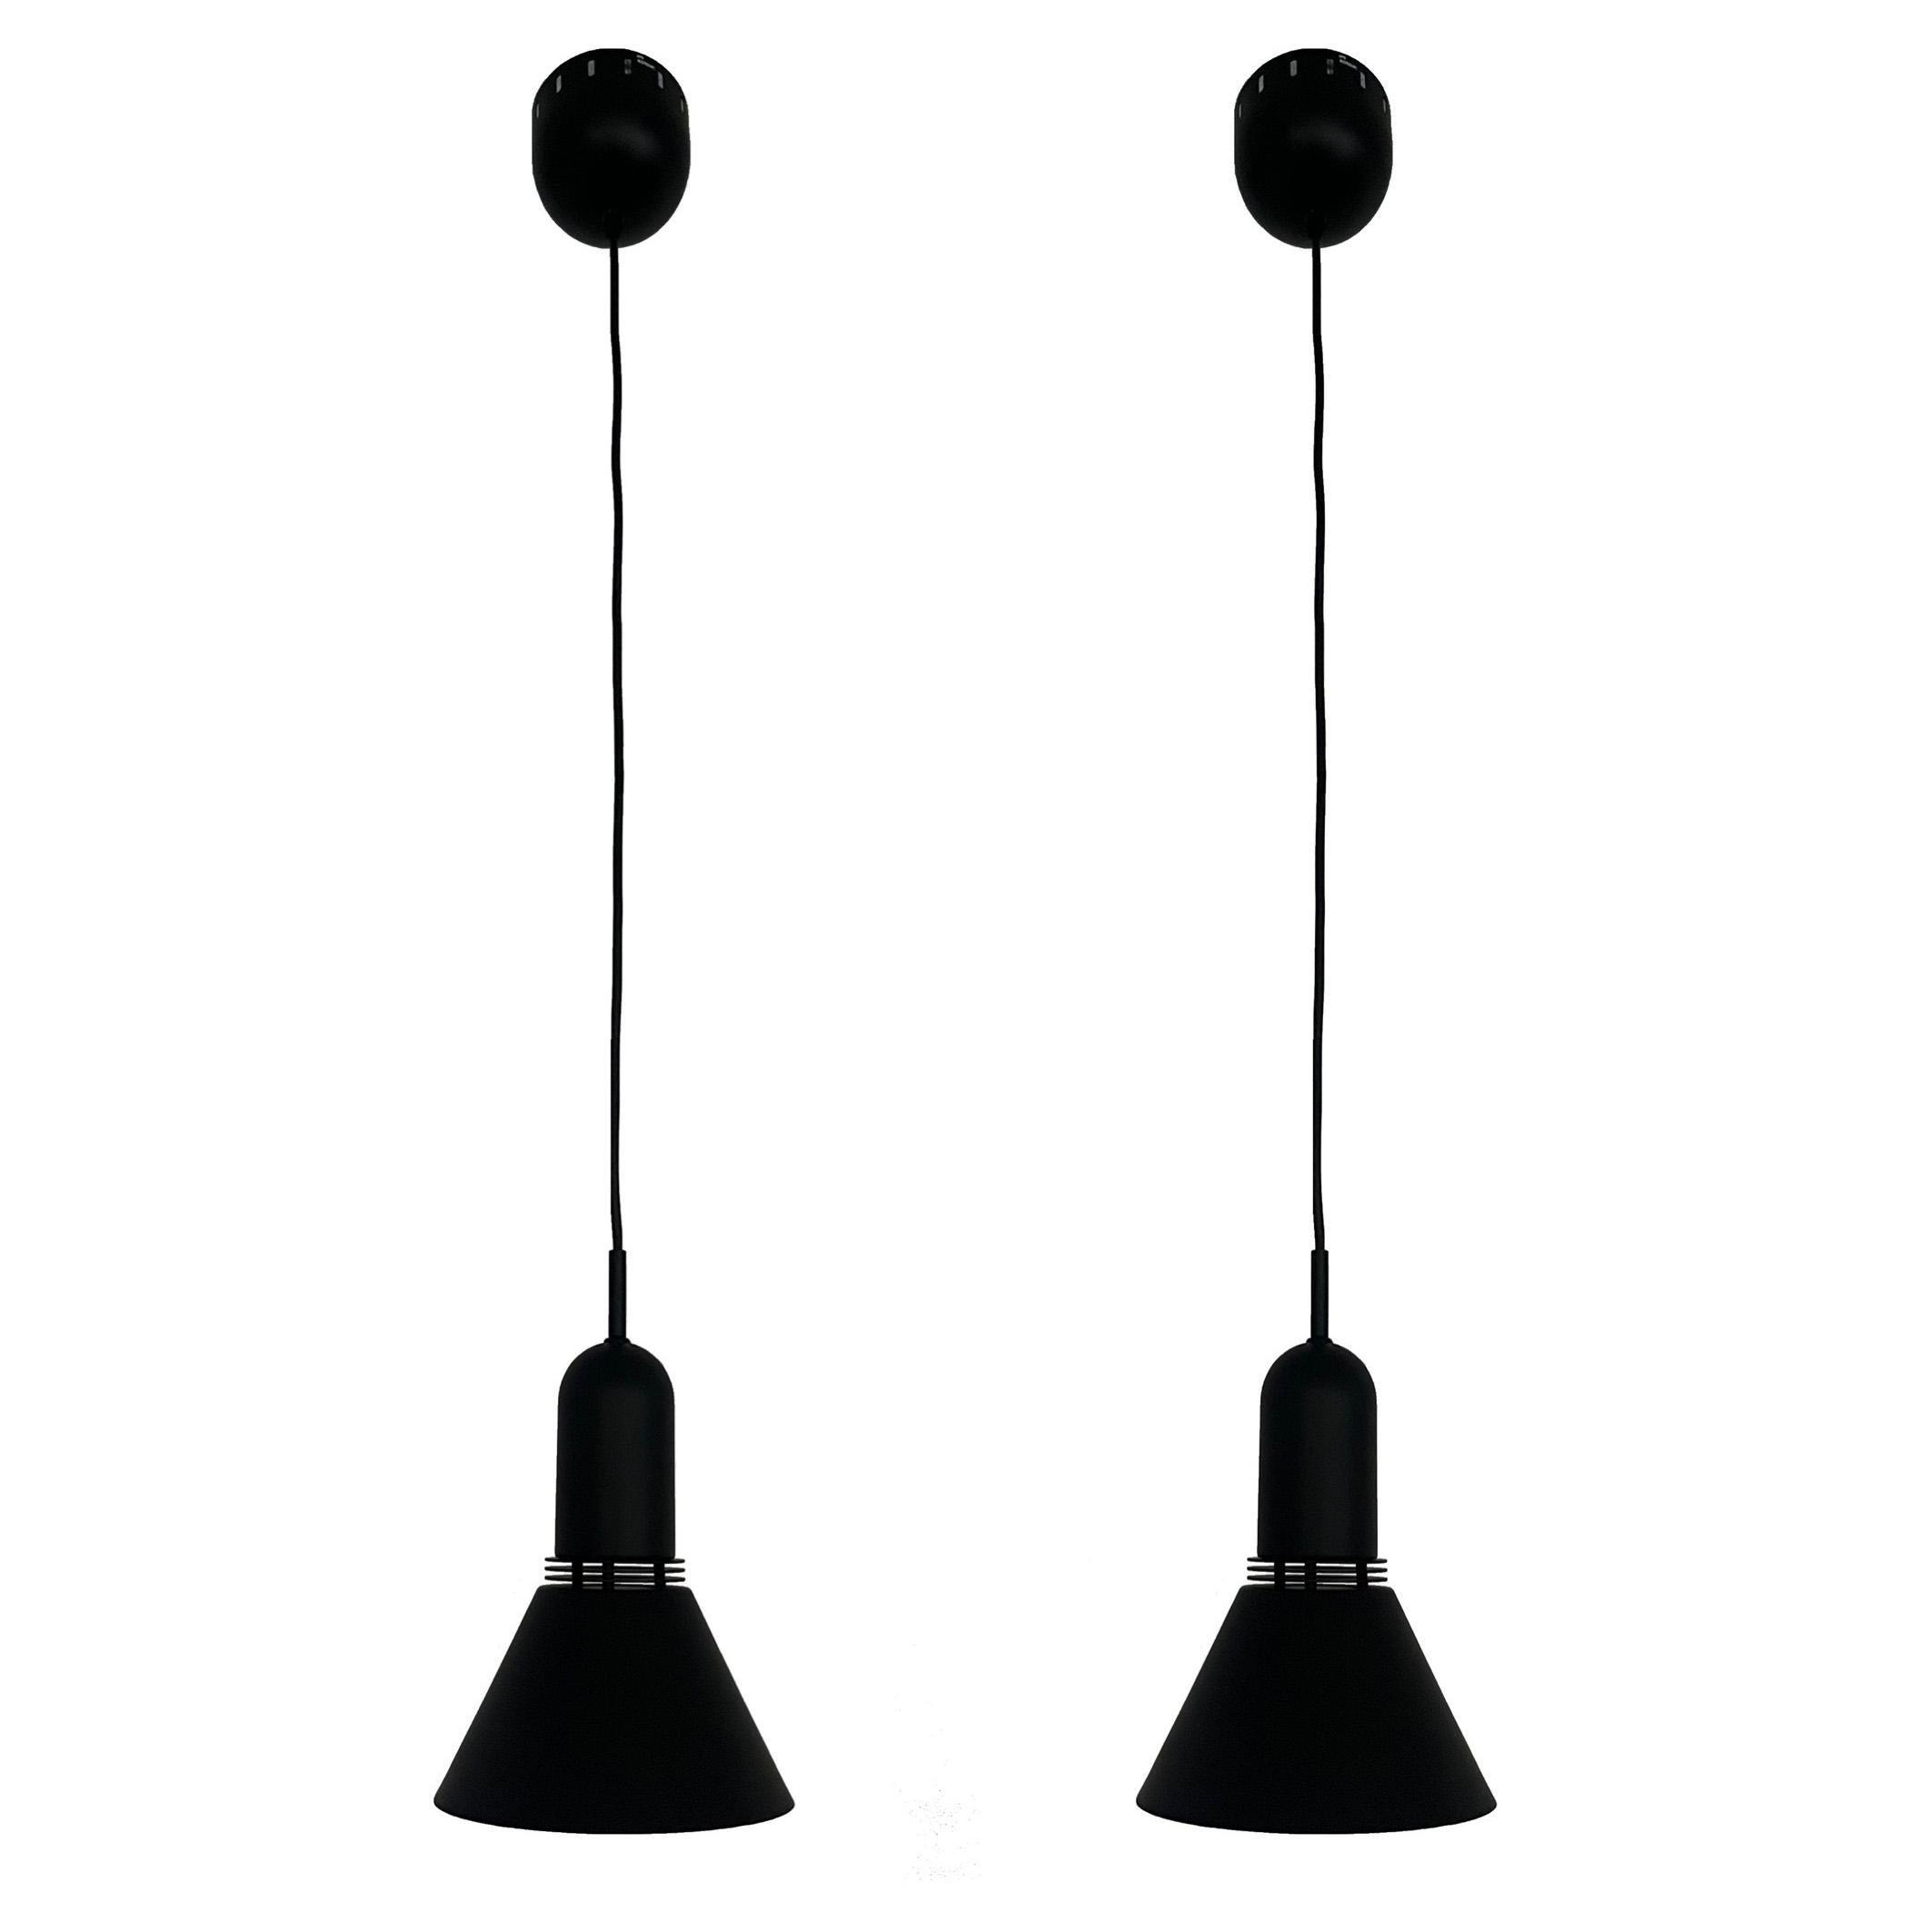 Beautiful Midcentury Pair of Black metal Long adjustable Chandeliers by Leonardo Marelli for Estiluz. Model: T-1142 Negro (black). These fixtures were designed and manufactured in Barcelona (Spain) during 1970s.
The condition is excellent, they